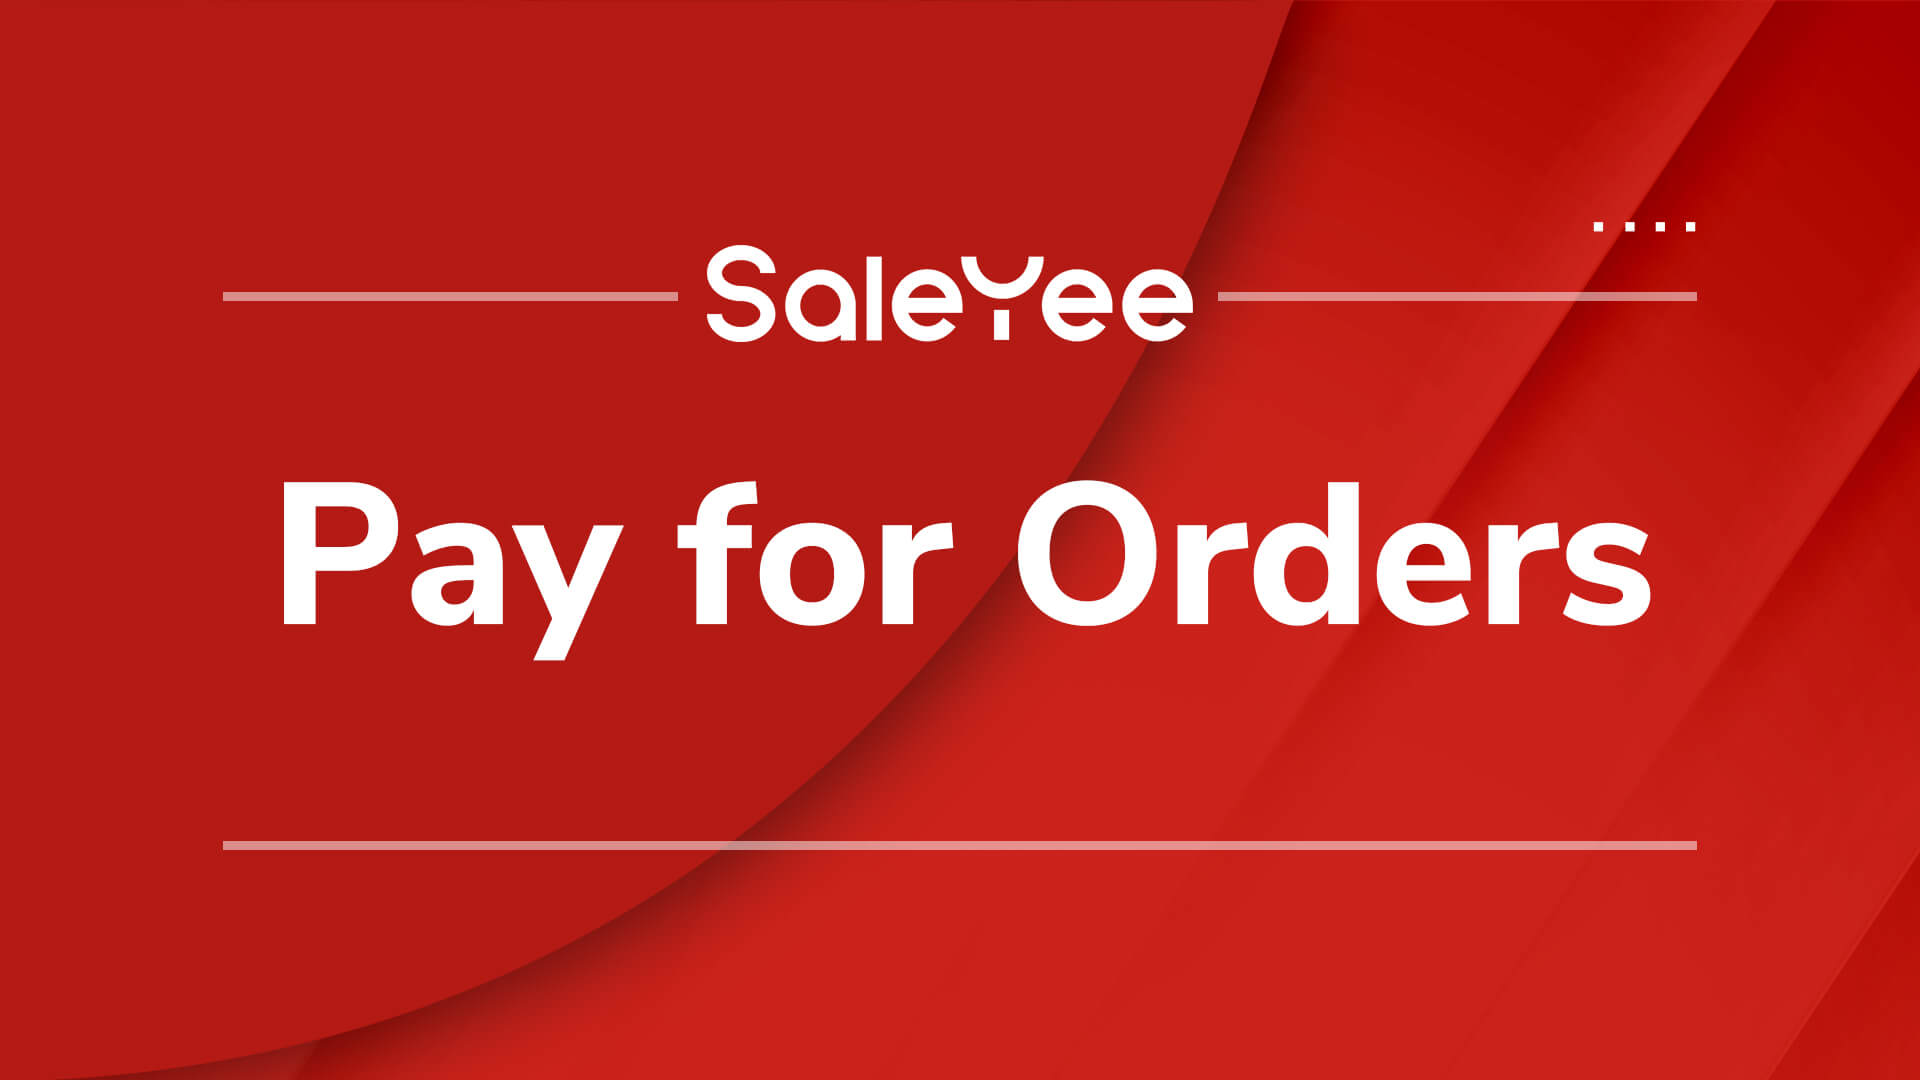 6. How to Pay for Orders on SaleYee